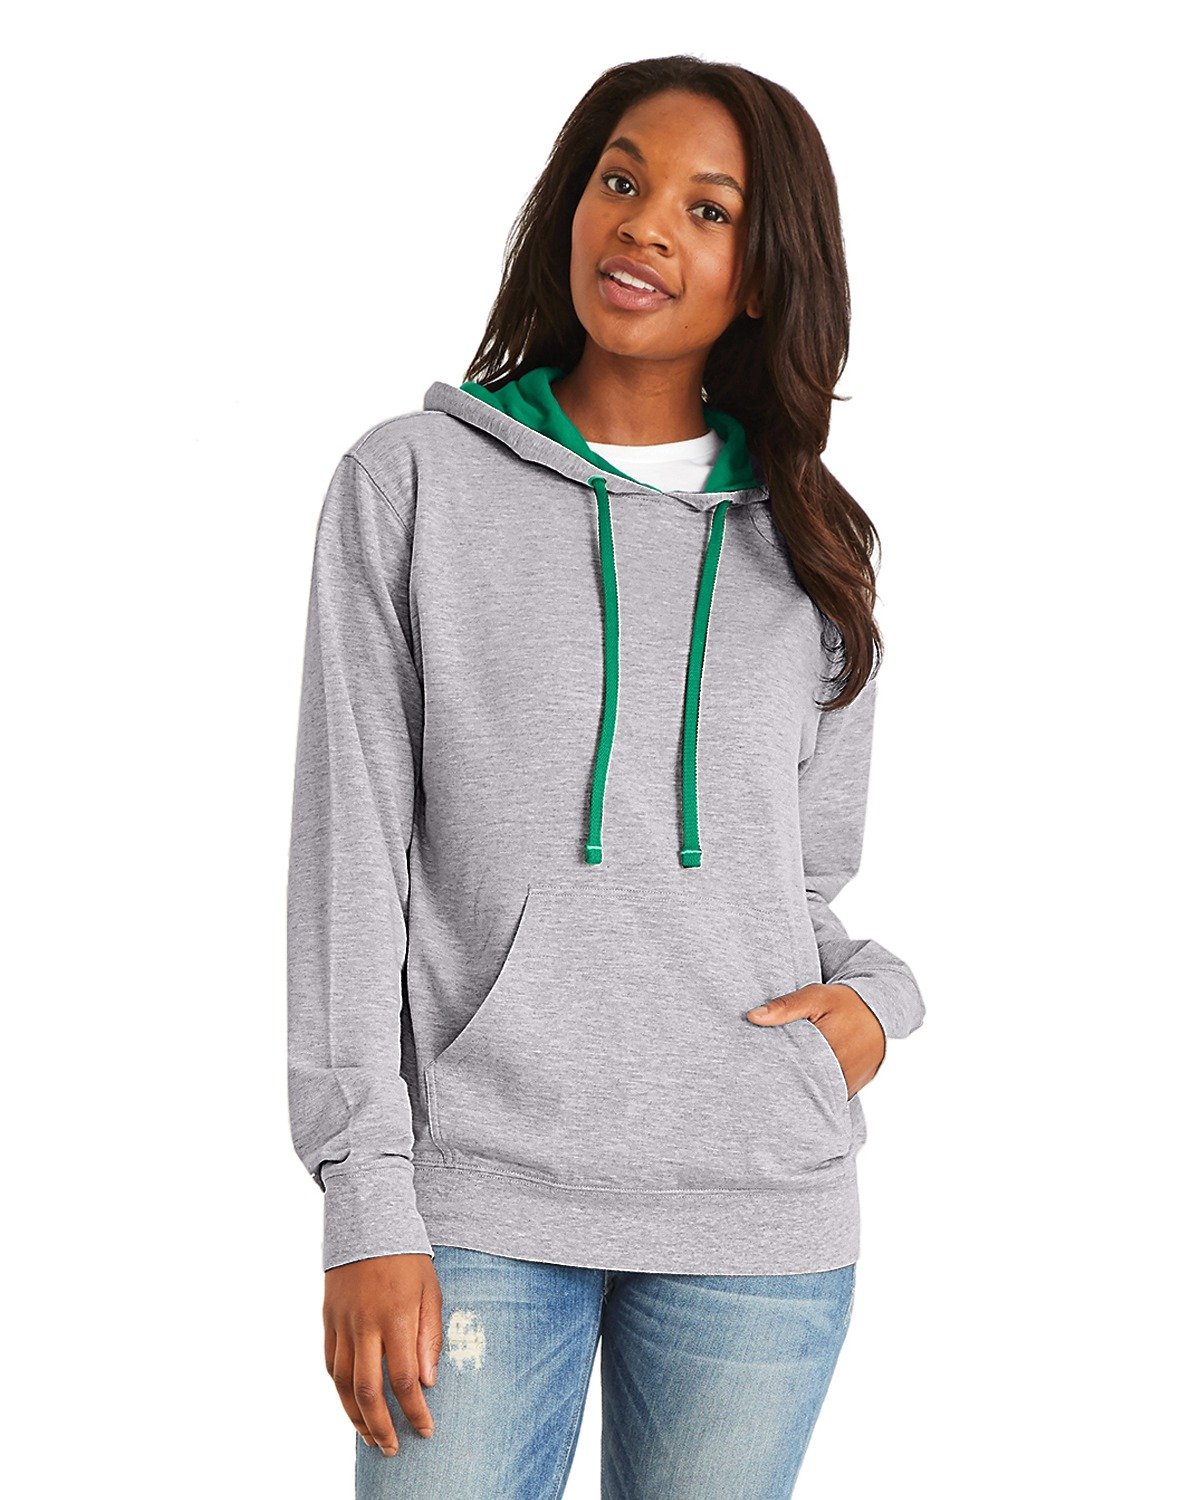 Next Level Apparel Unisex French Terry Pullover Hoodie HTHR GRY/ KL GRN 